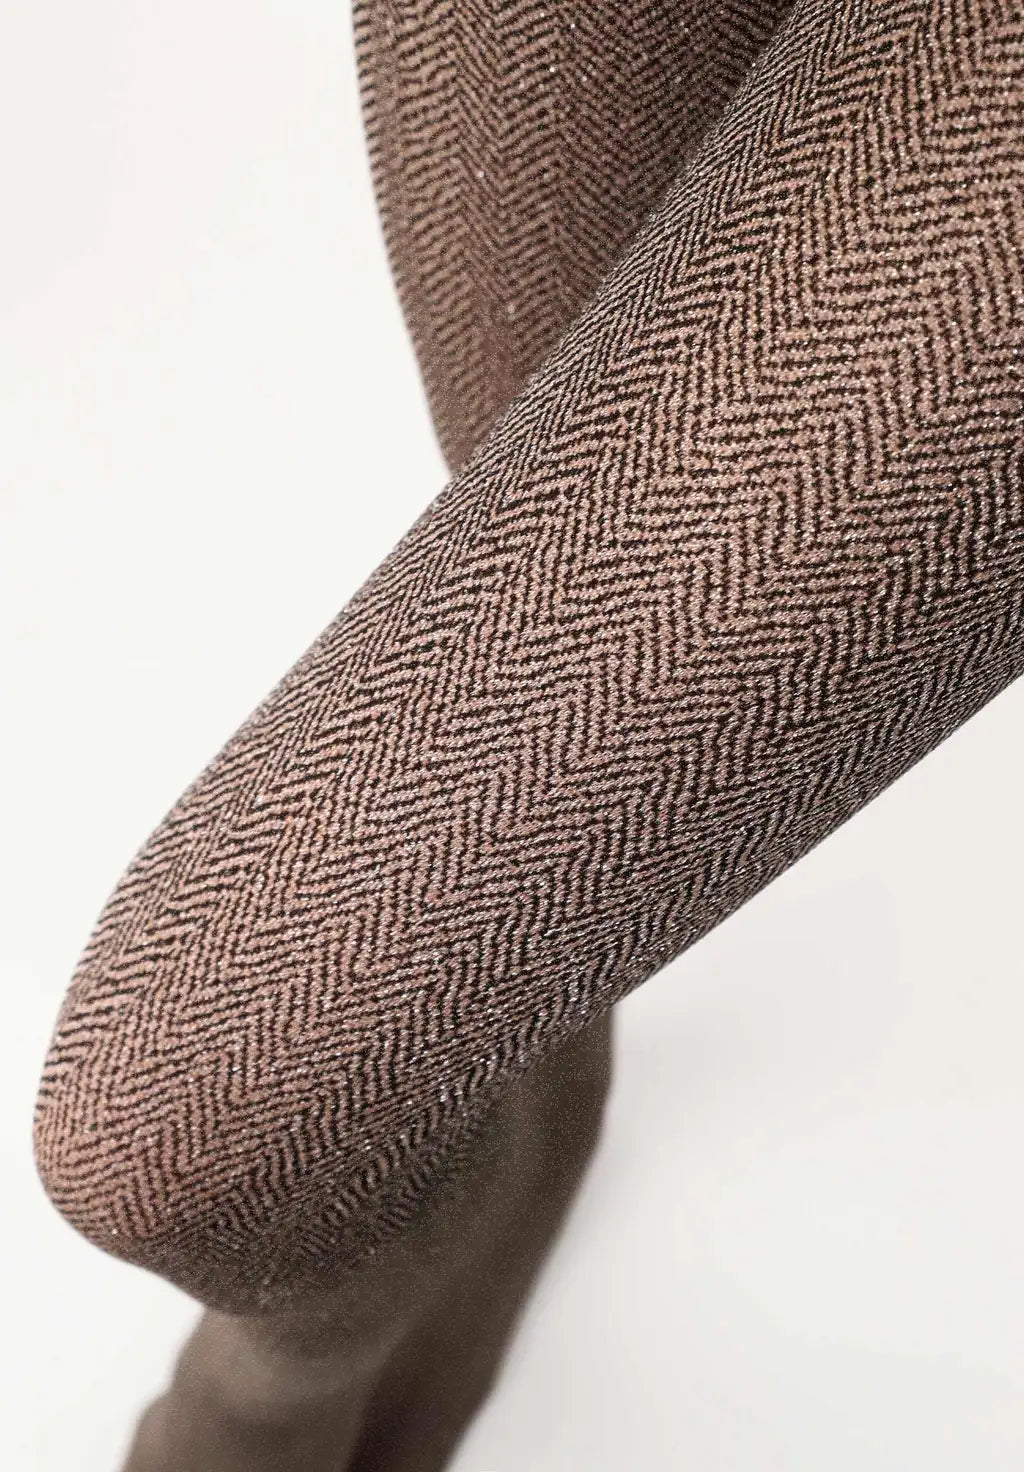 Oroblù Sparkle Tweed Collant - Opaque two-toned tweed herringbone patterned fashion tights in beige and black with sparkly lamé lurex